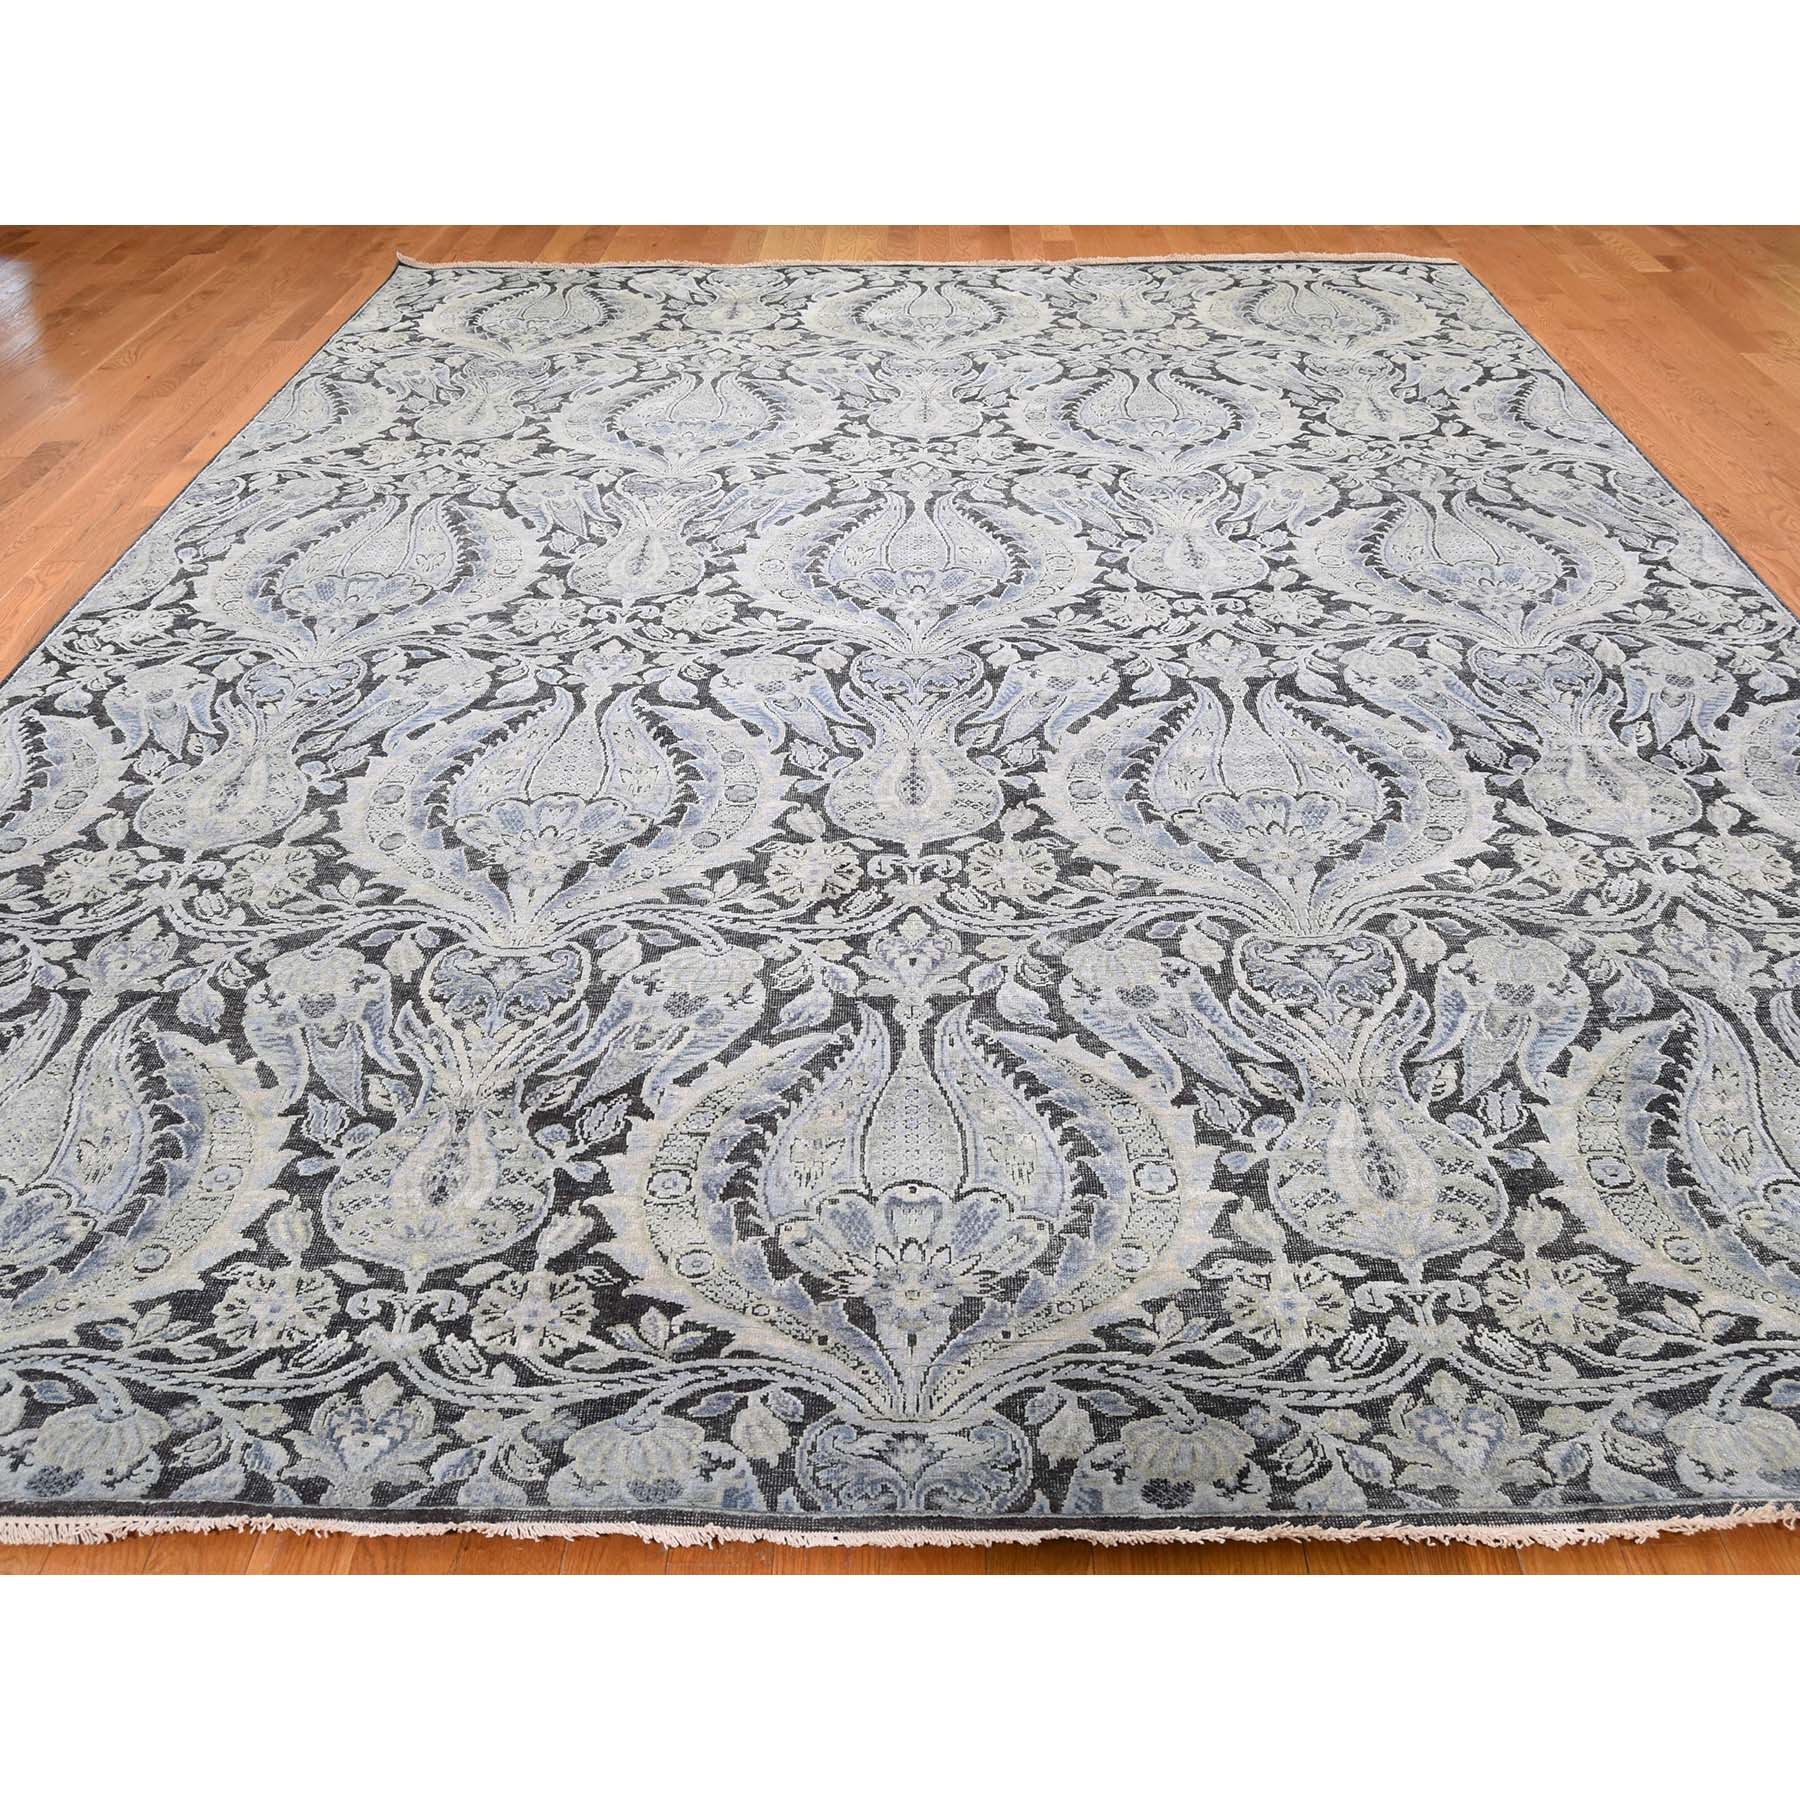 9-x12-2  Pure Silk With Textured Wool Lotus Flower Design Hand-Knotted Rug 